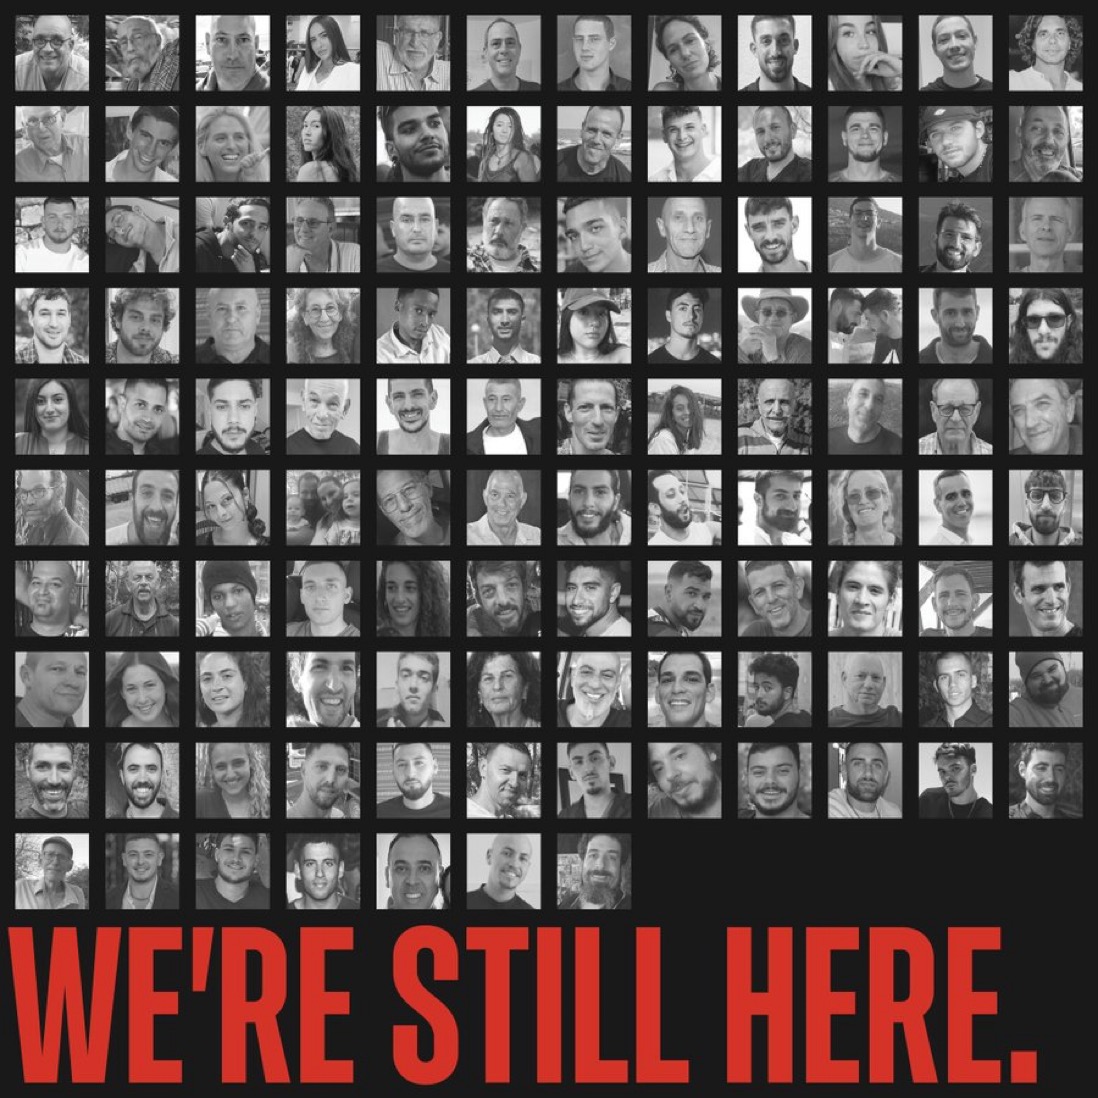 They have spent 208 days being tortured, starved, and abused. The hostages need to come home. Now!